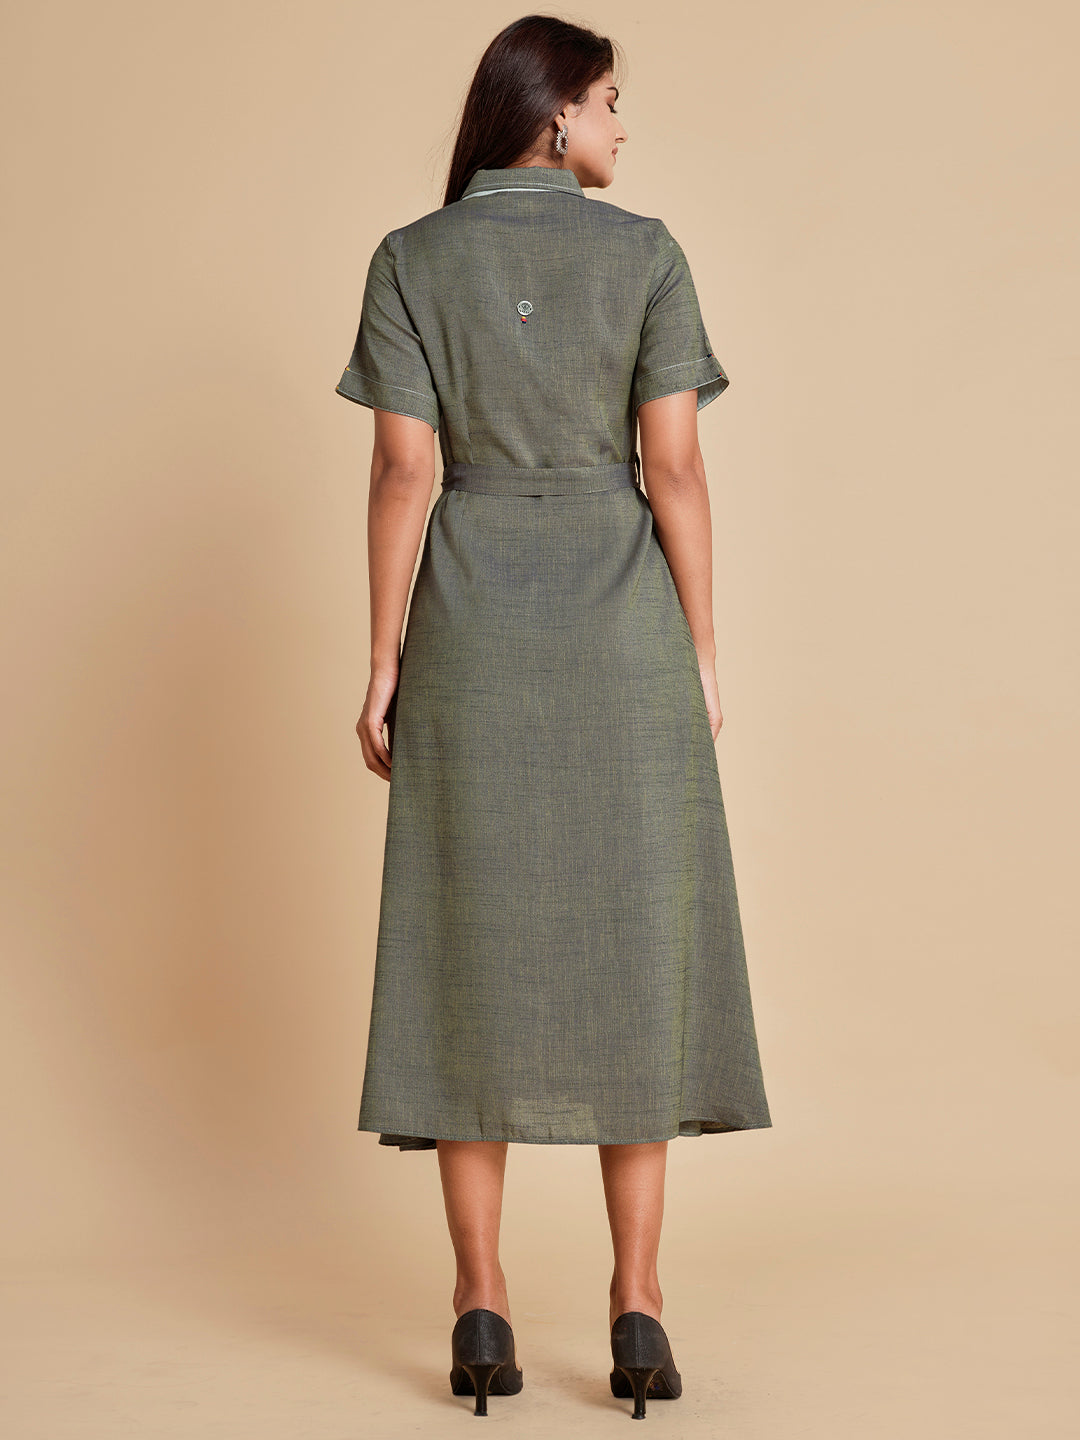 Olive Shirt Dress With Tie Up Belt - ARH909A